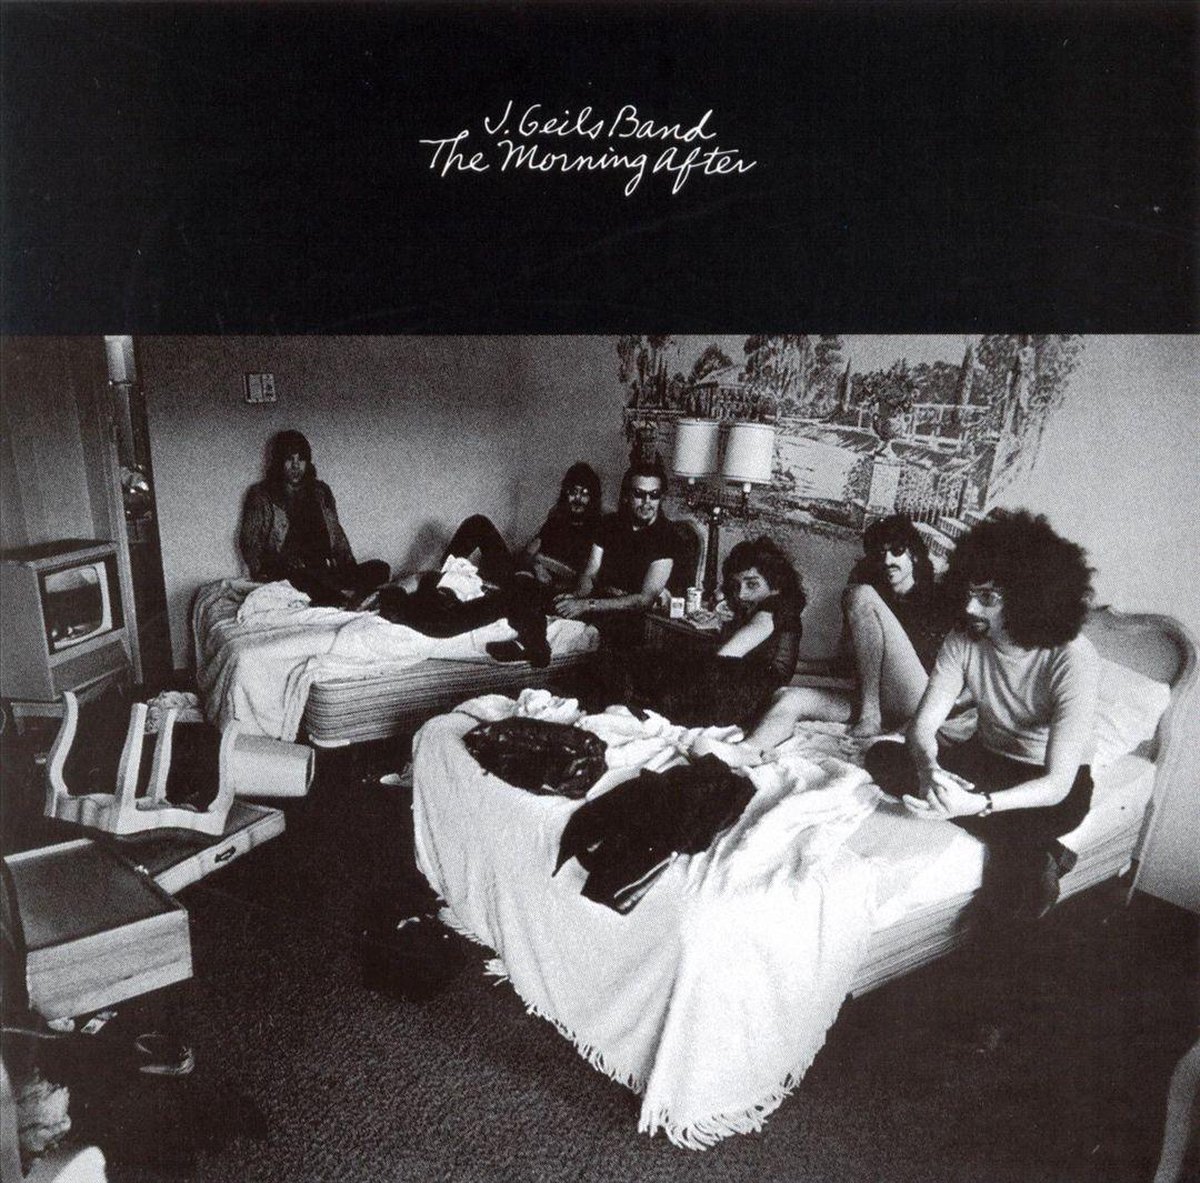 J. Geils Band – The Morning After